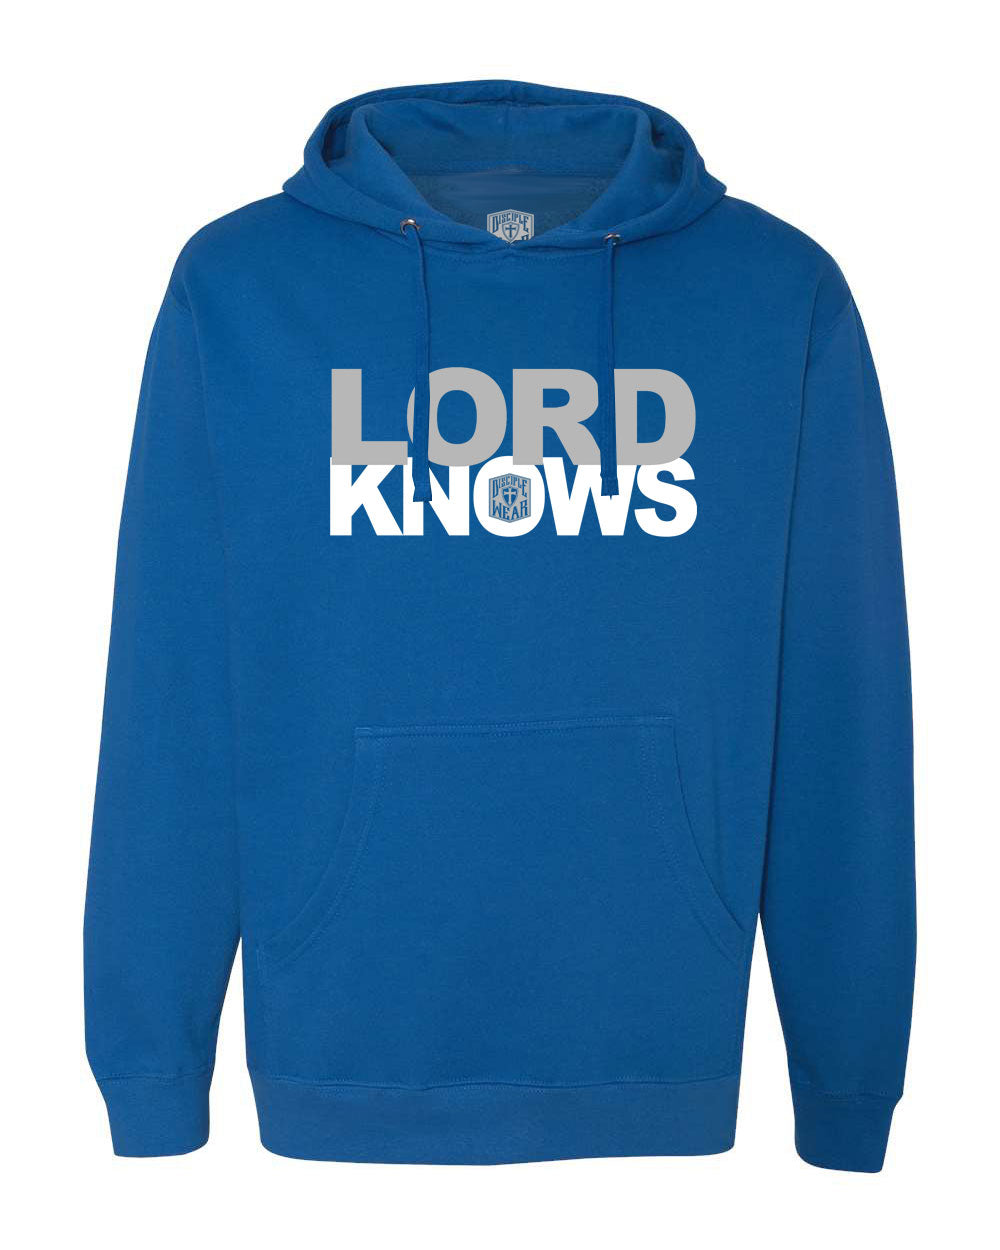 LORD KNOWS HOODY